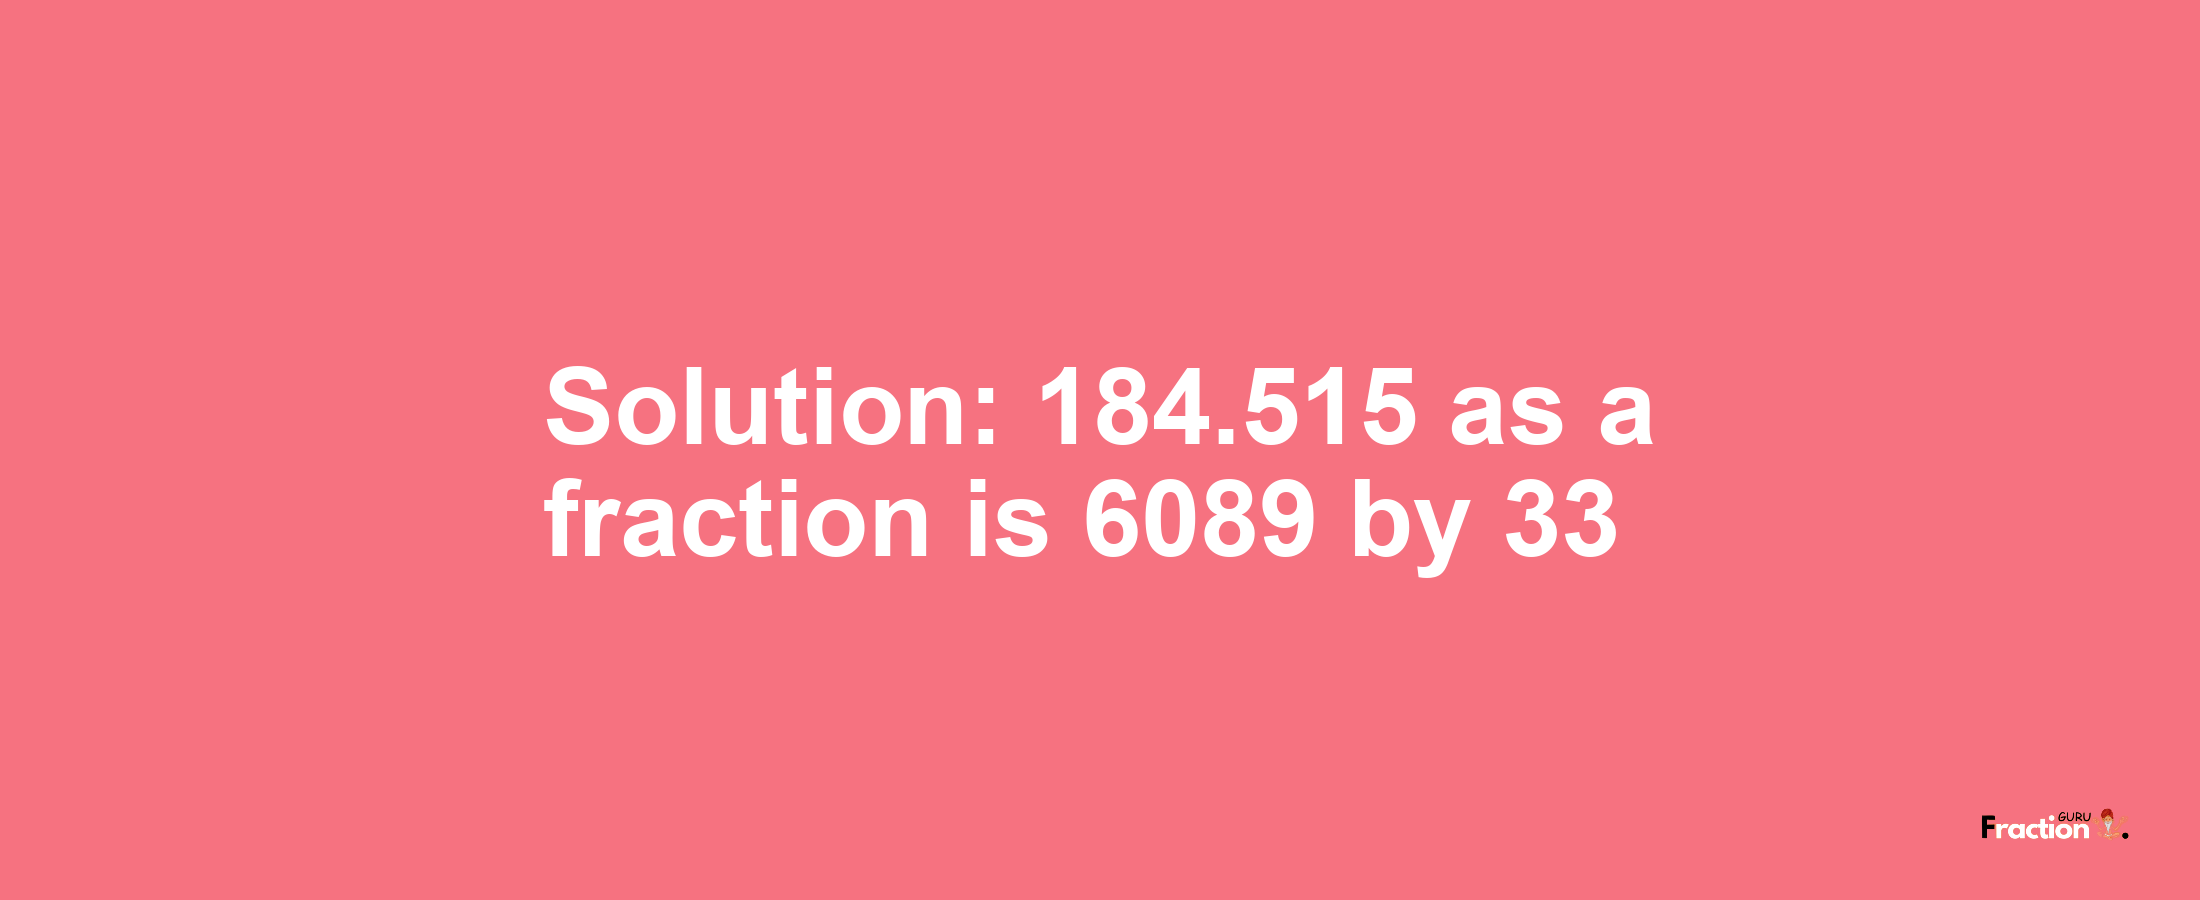 Solution:184.515 as a fraction is 6089/33